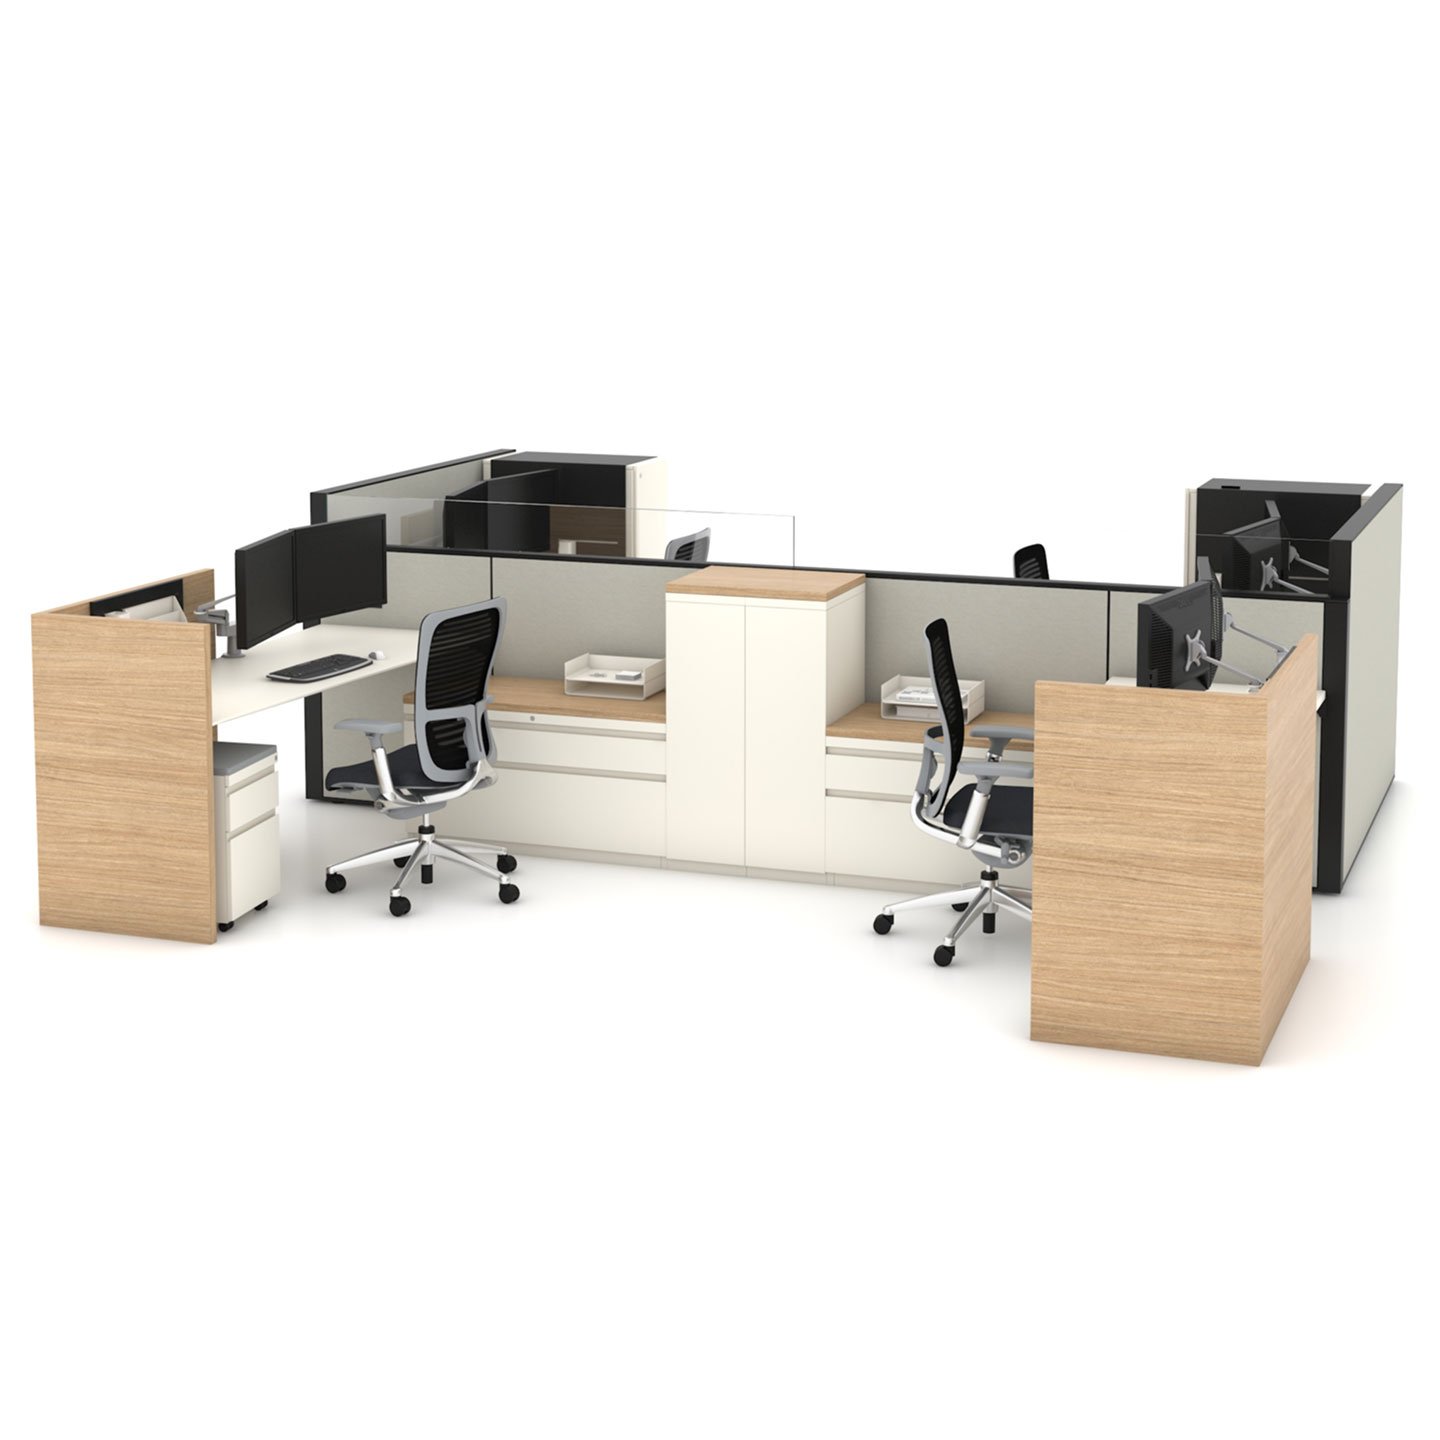 Haworth Compose Workspace in a mock up office space with dividers in-between desks with a wood finish 